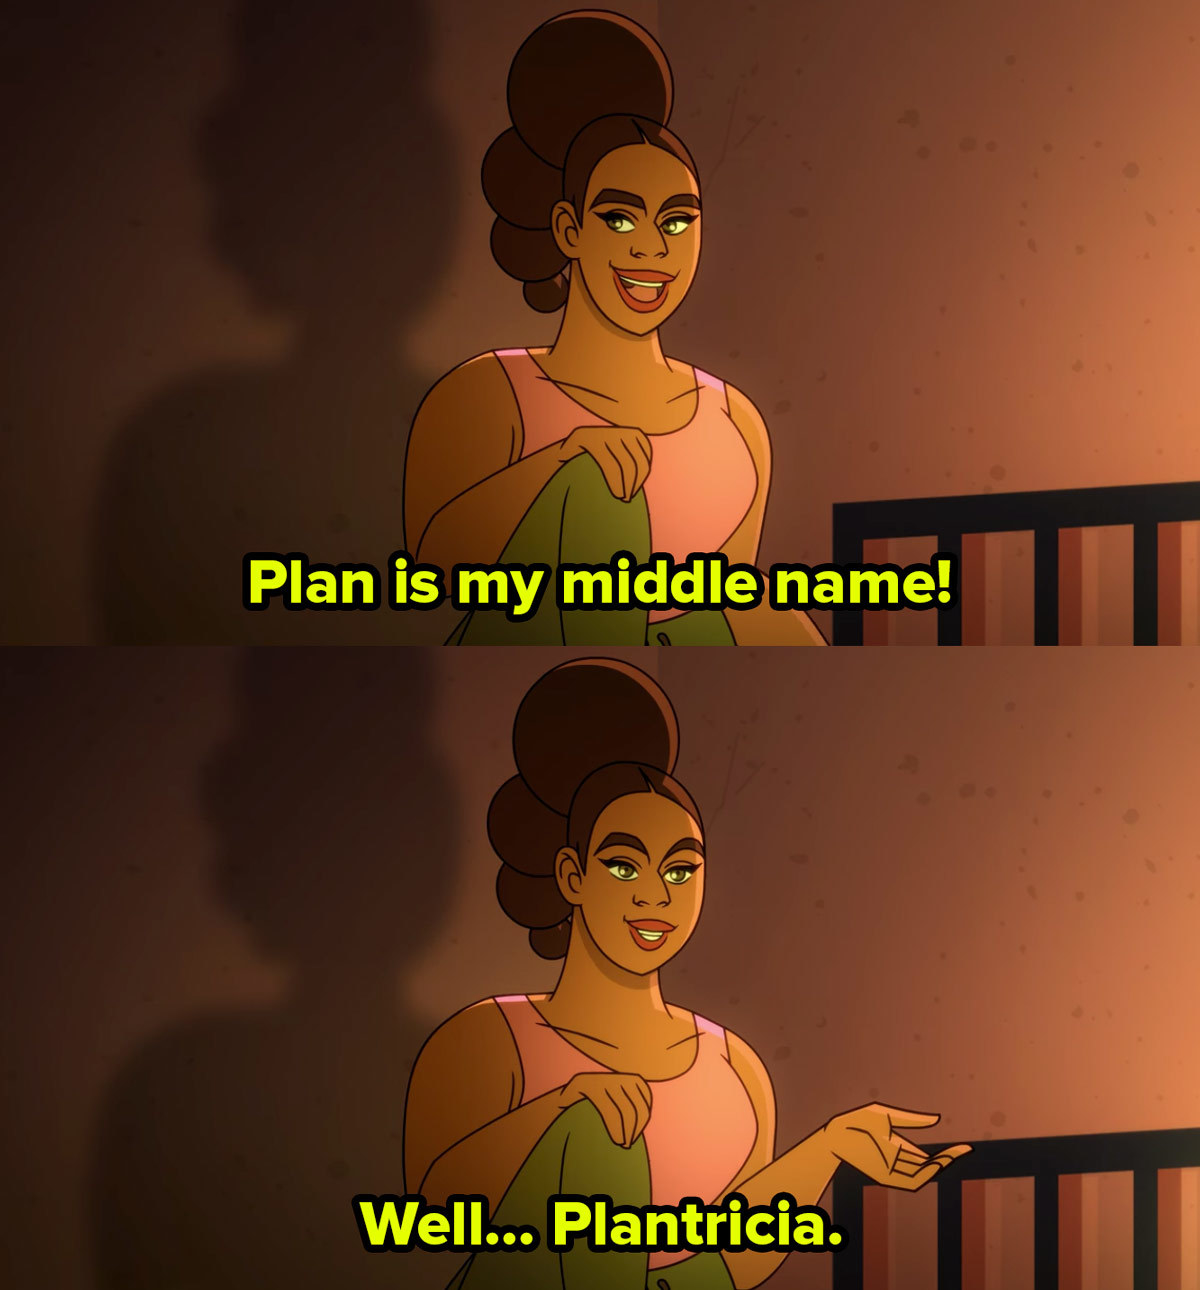 A Black cartoon woman sits in a darkened room and smiles saying Plan is my middle name, well, Plantricia